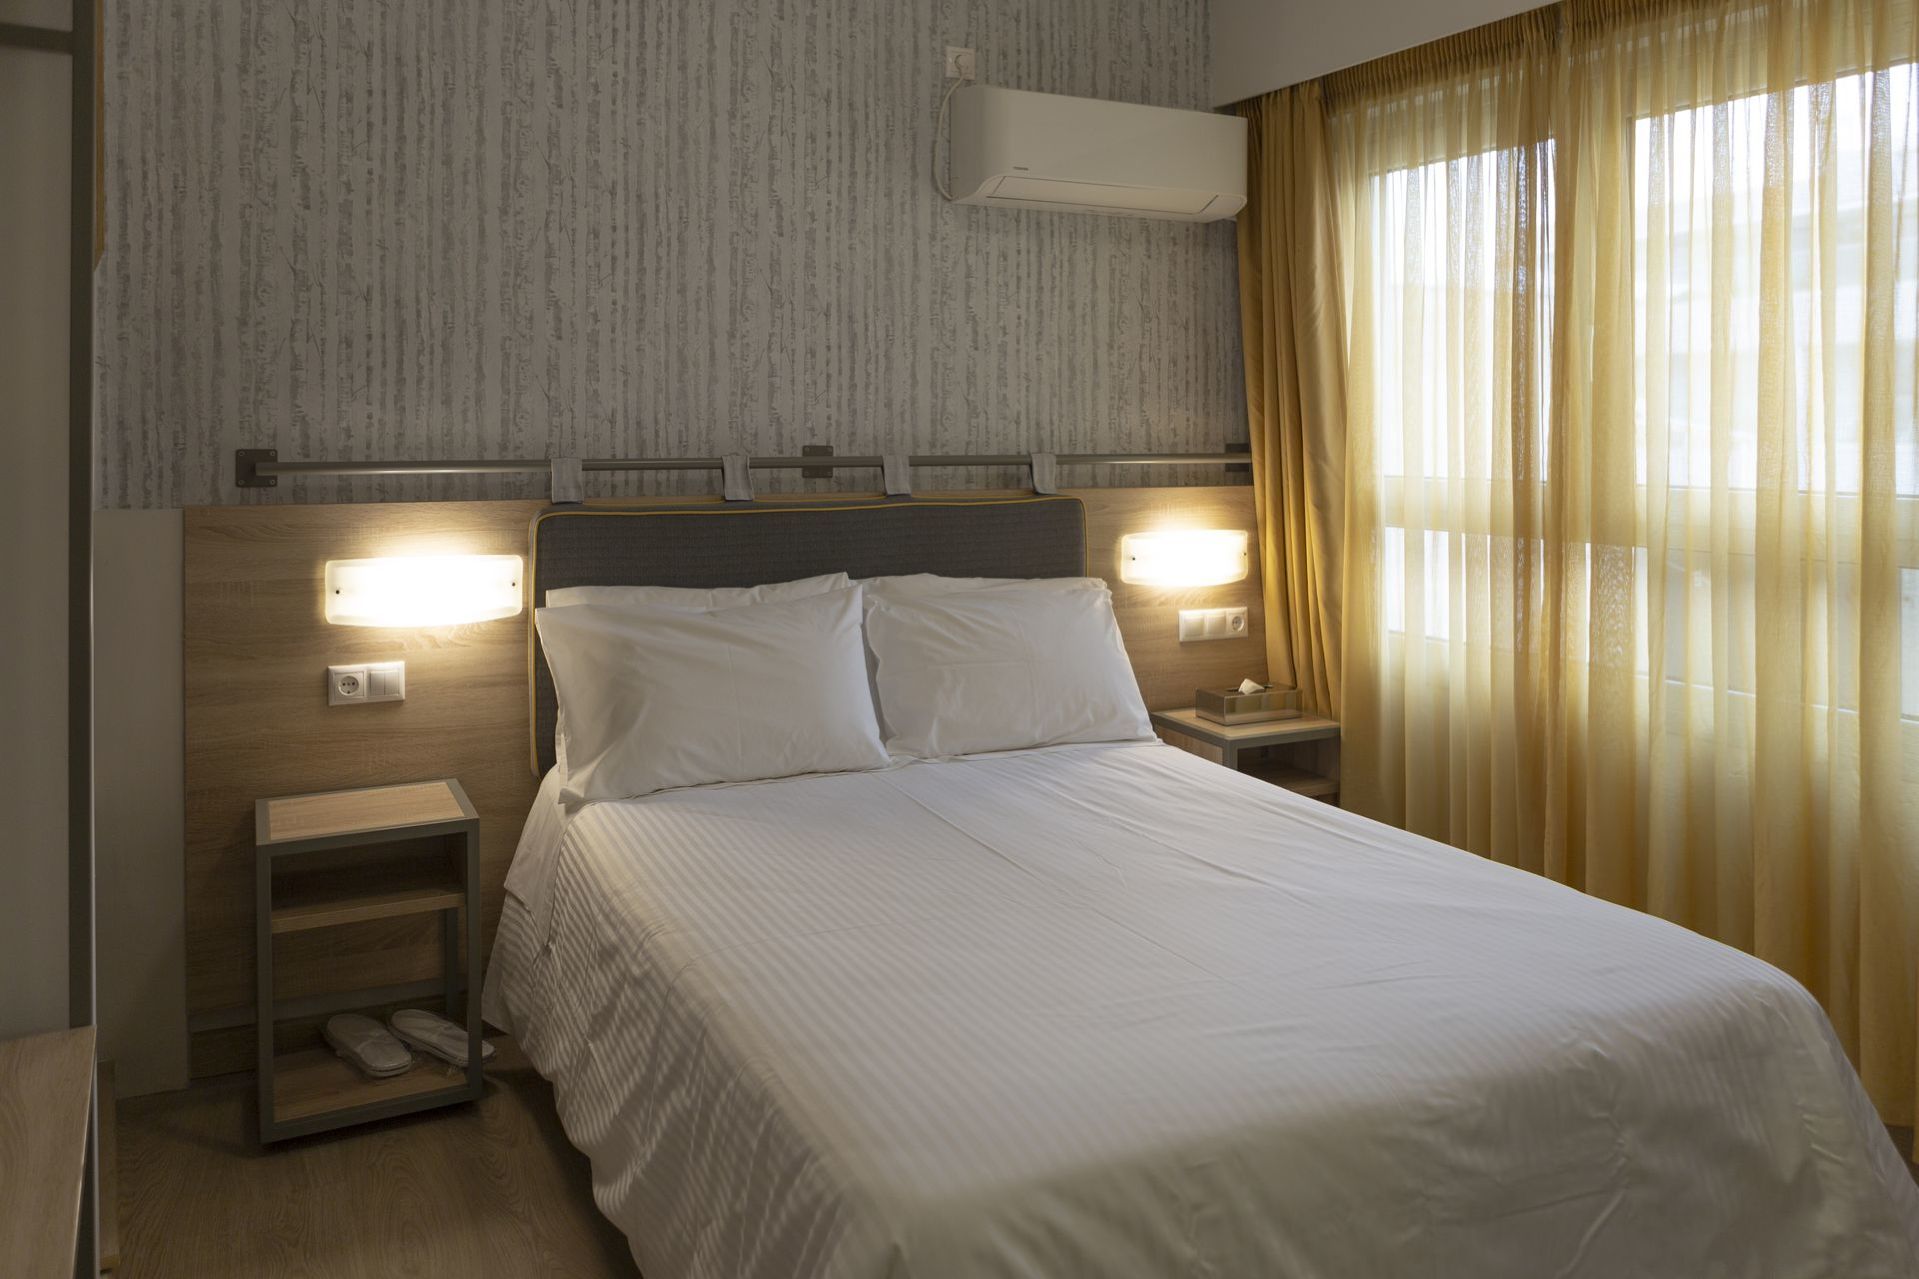 Pan Hotel-Athens Updated 2022 Room Price-Reviews & Deals | Trip.com